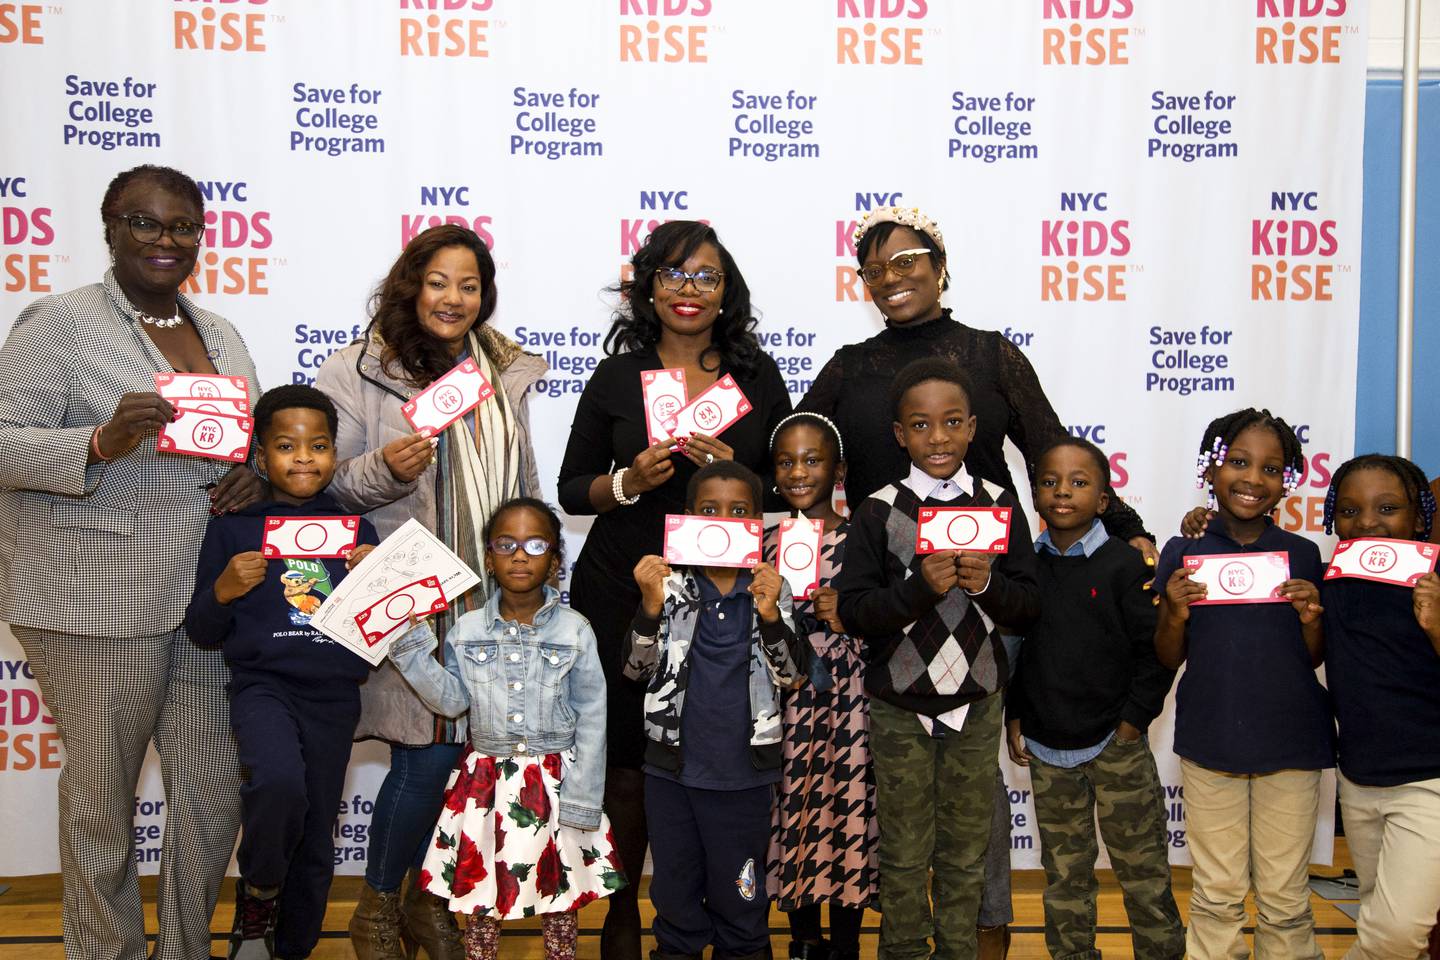 1,200 First Graders in Canarsie and East Flatbush to Receive $1,000 Each in  College and Career Savings, as Part of Efforts to Narrow the Racial Wealth  Gap - NYC Kids RISE